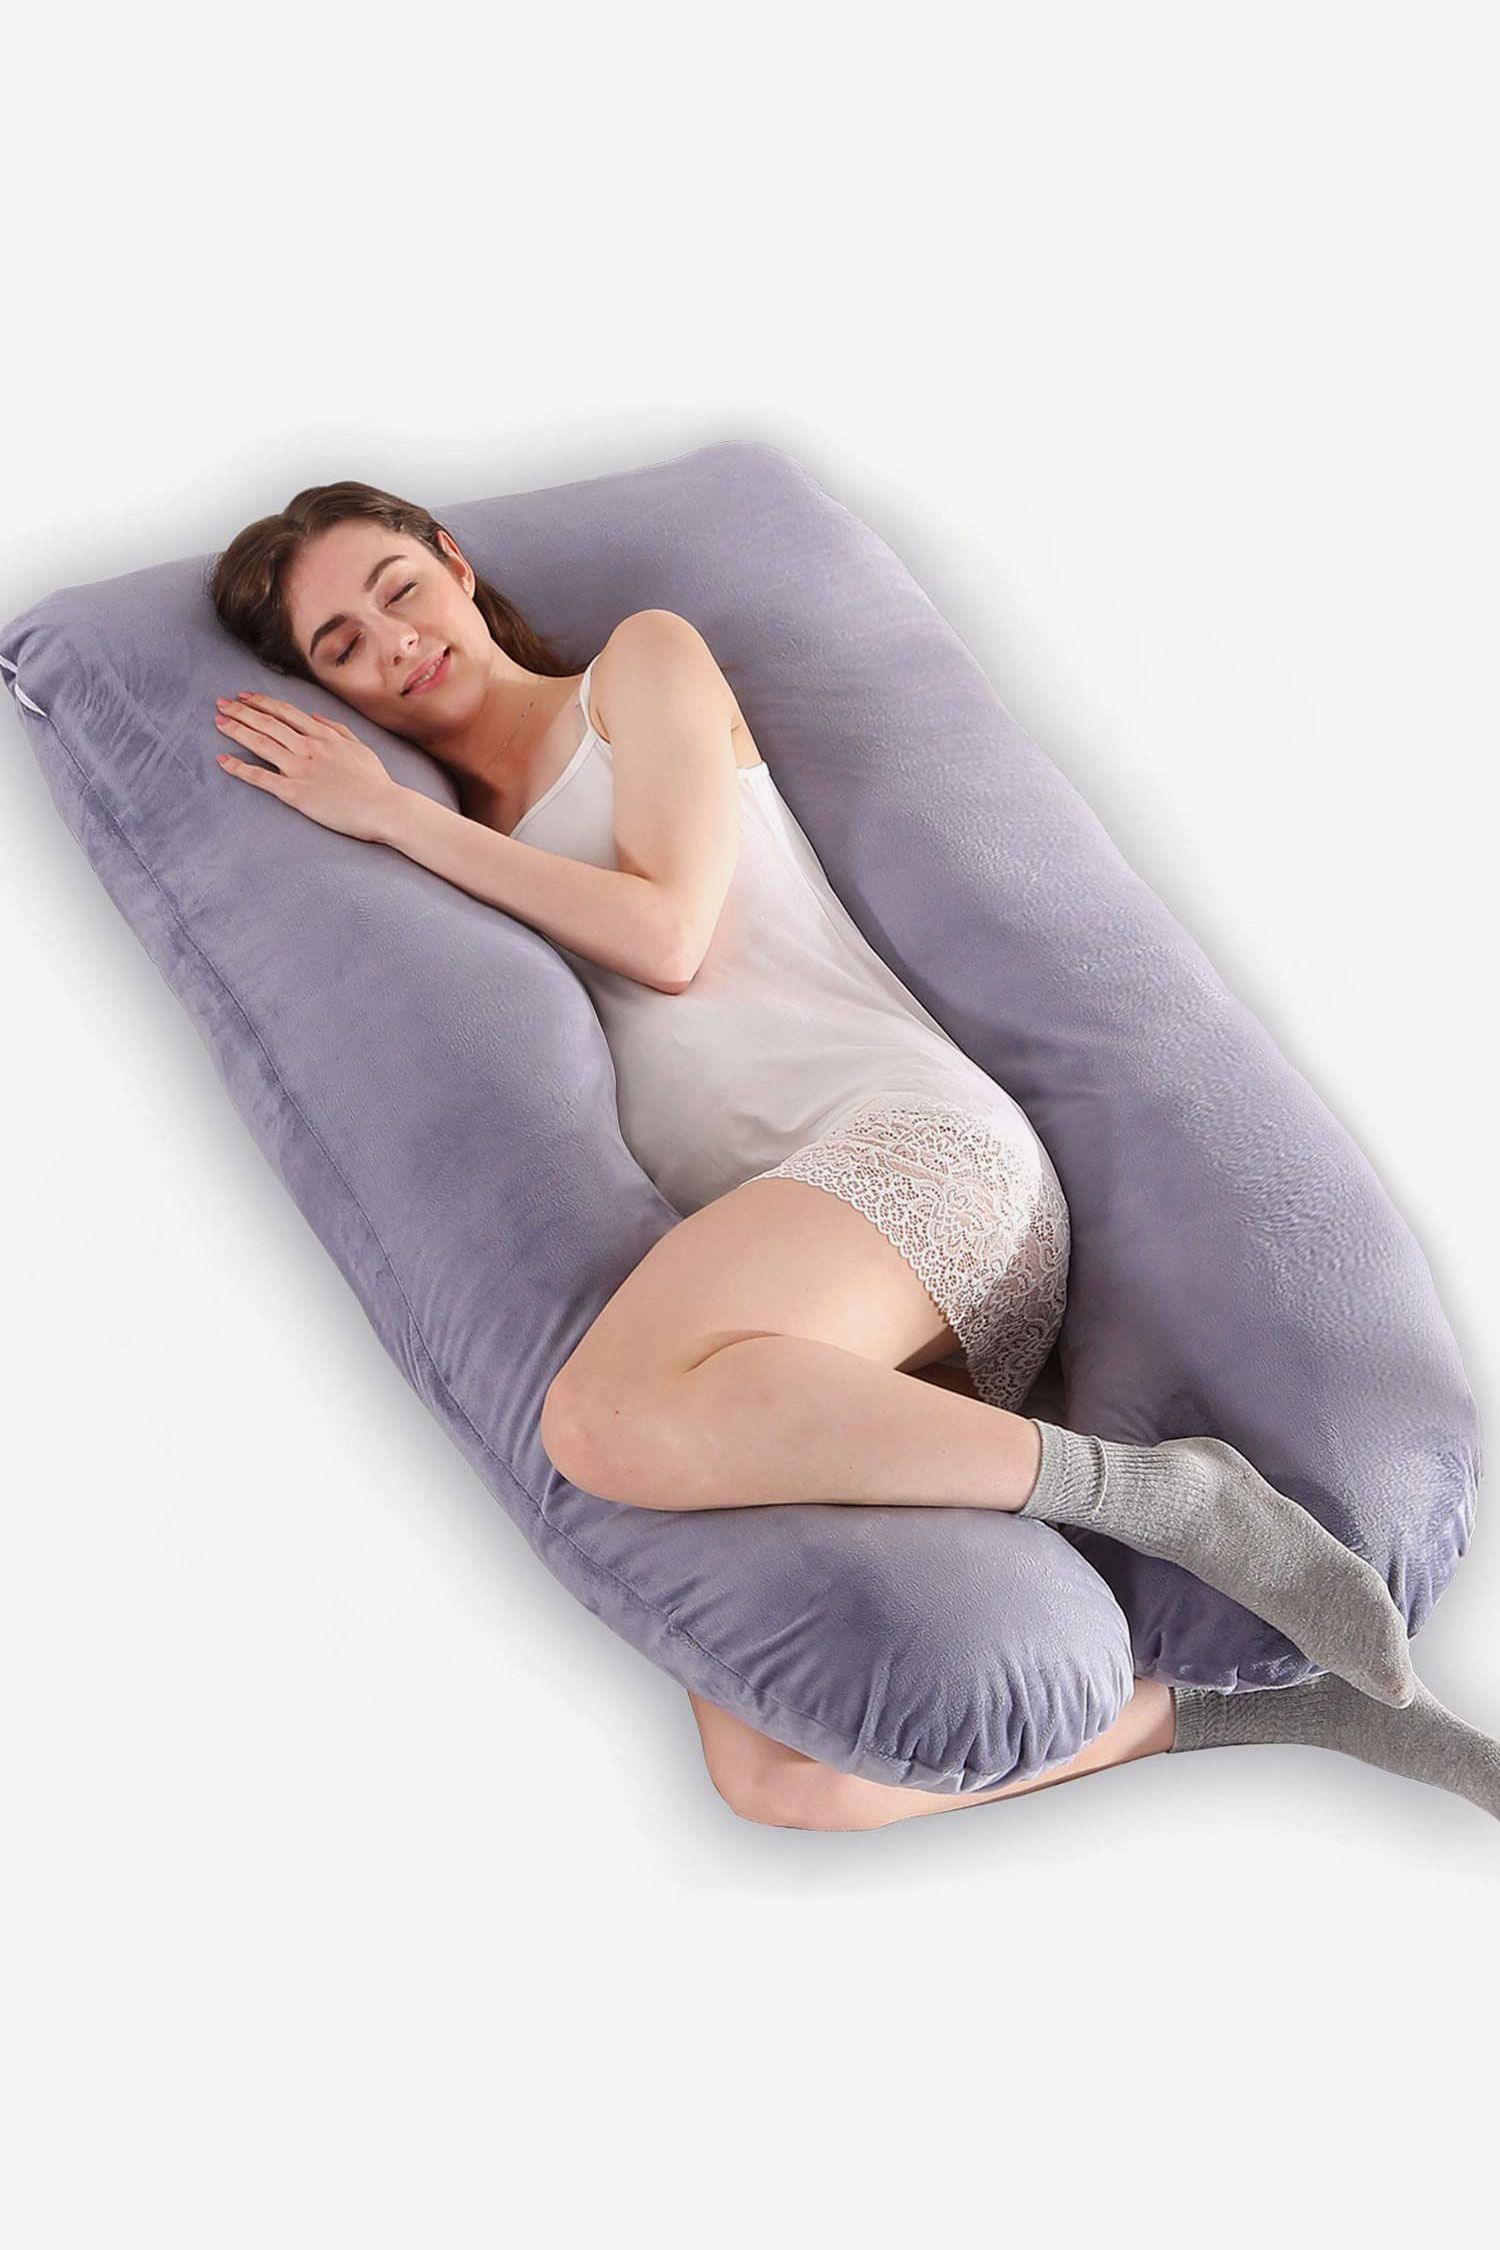 what is the purpose of a pregnancy pillow